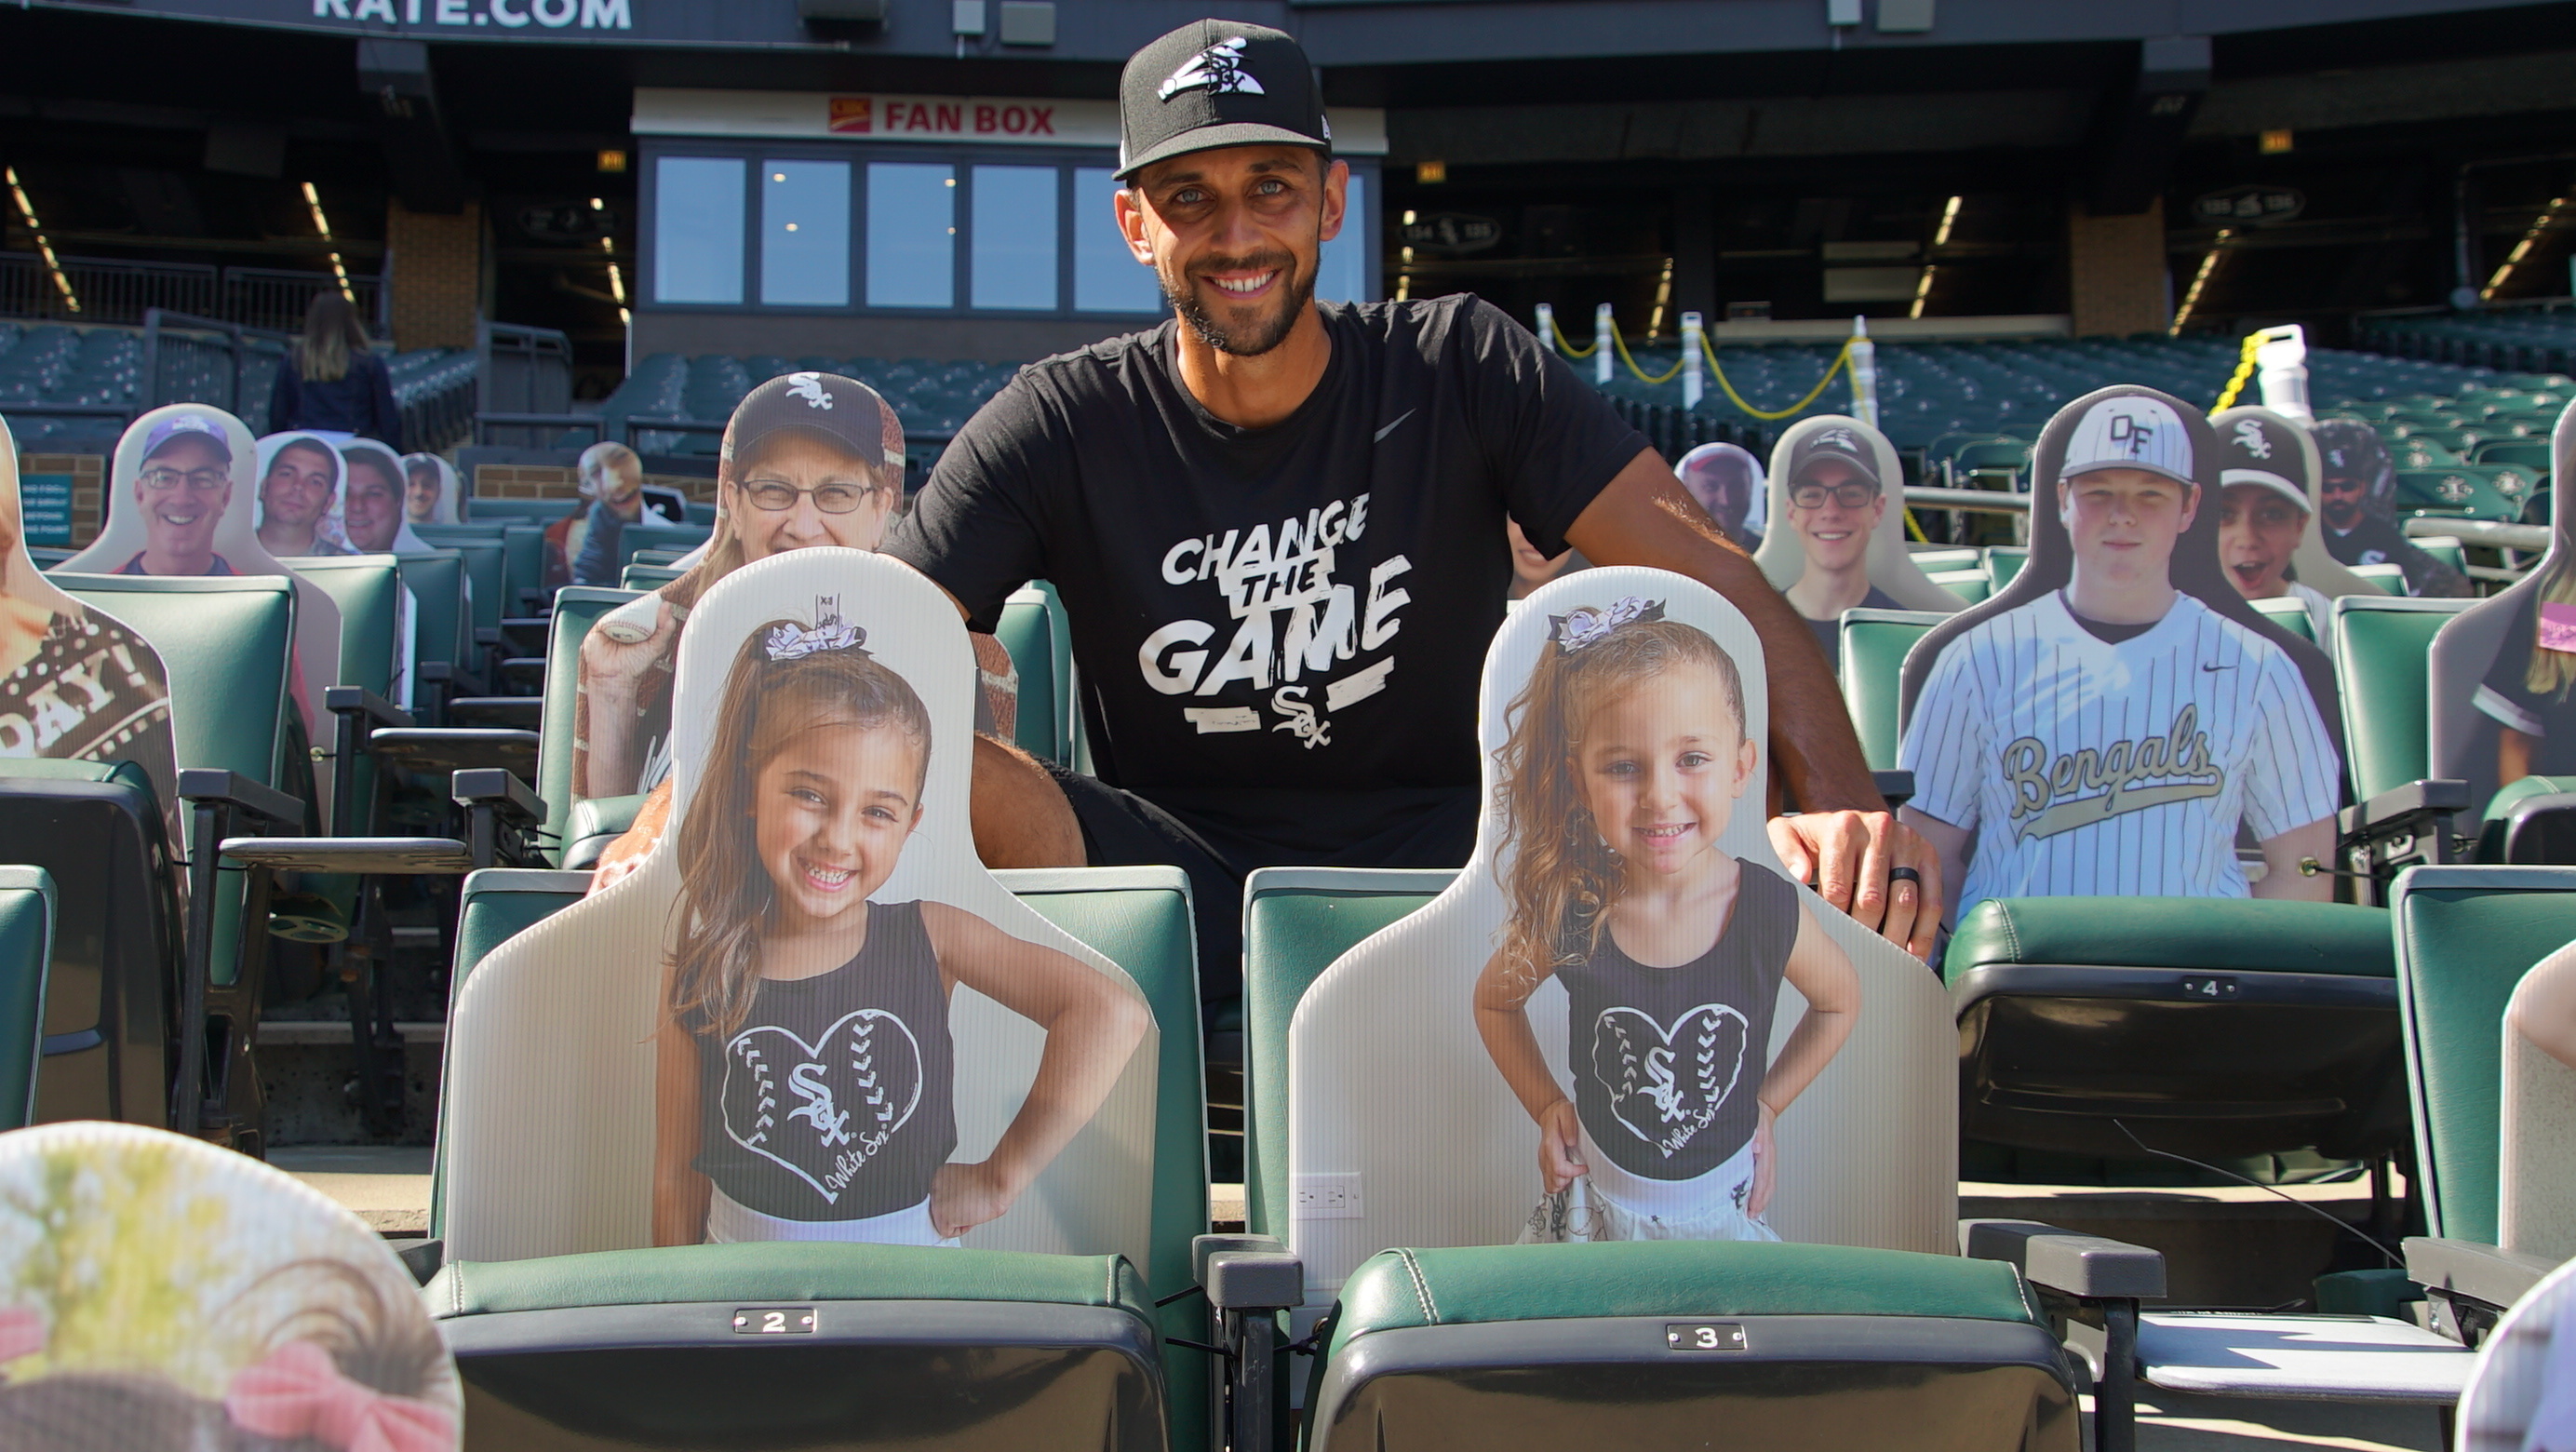 Cardboard cutouts will stand in for fans at Chicago White Sox games